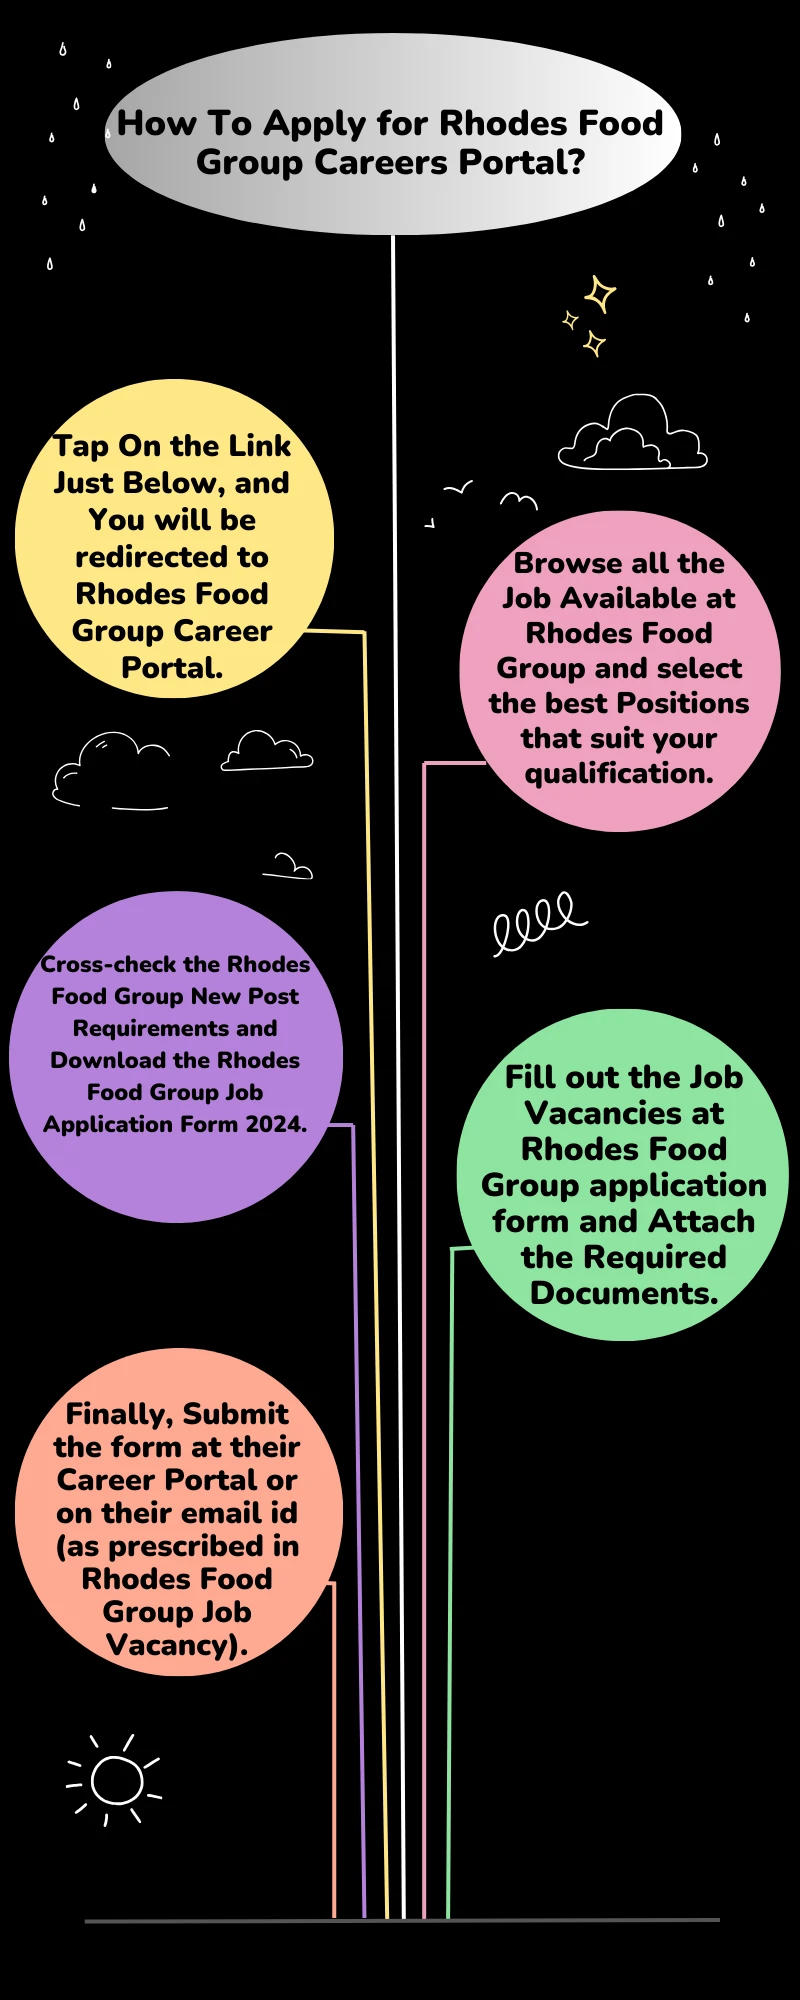 How To Apply for Rhodes Food Group Careers Portal?